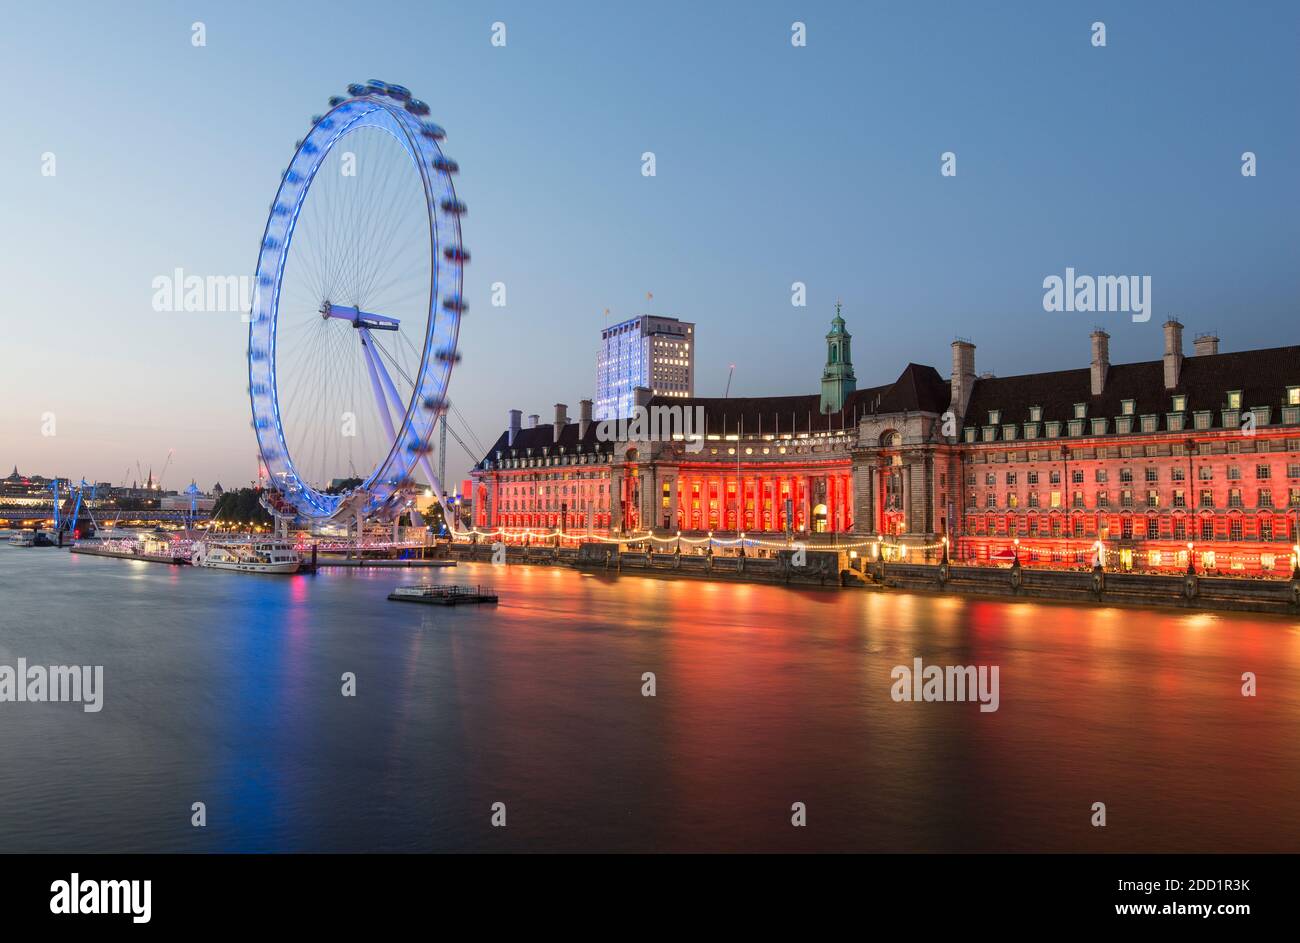 London Eye along the River Thames at sunset in London, England. Stock Photo